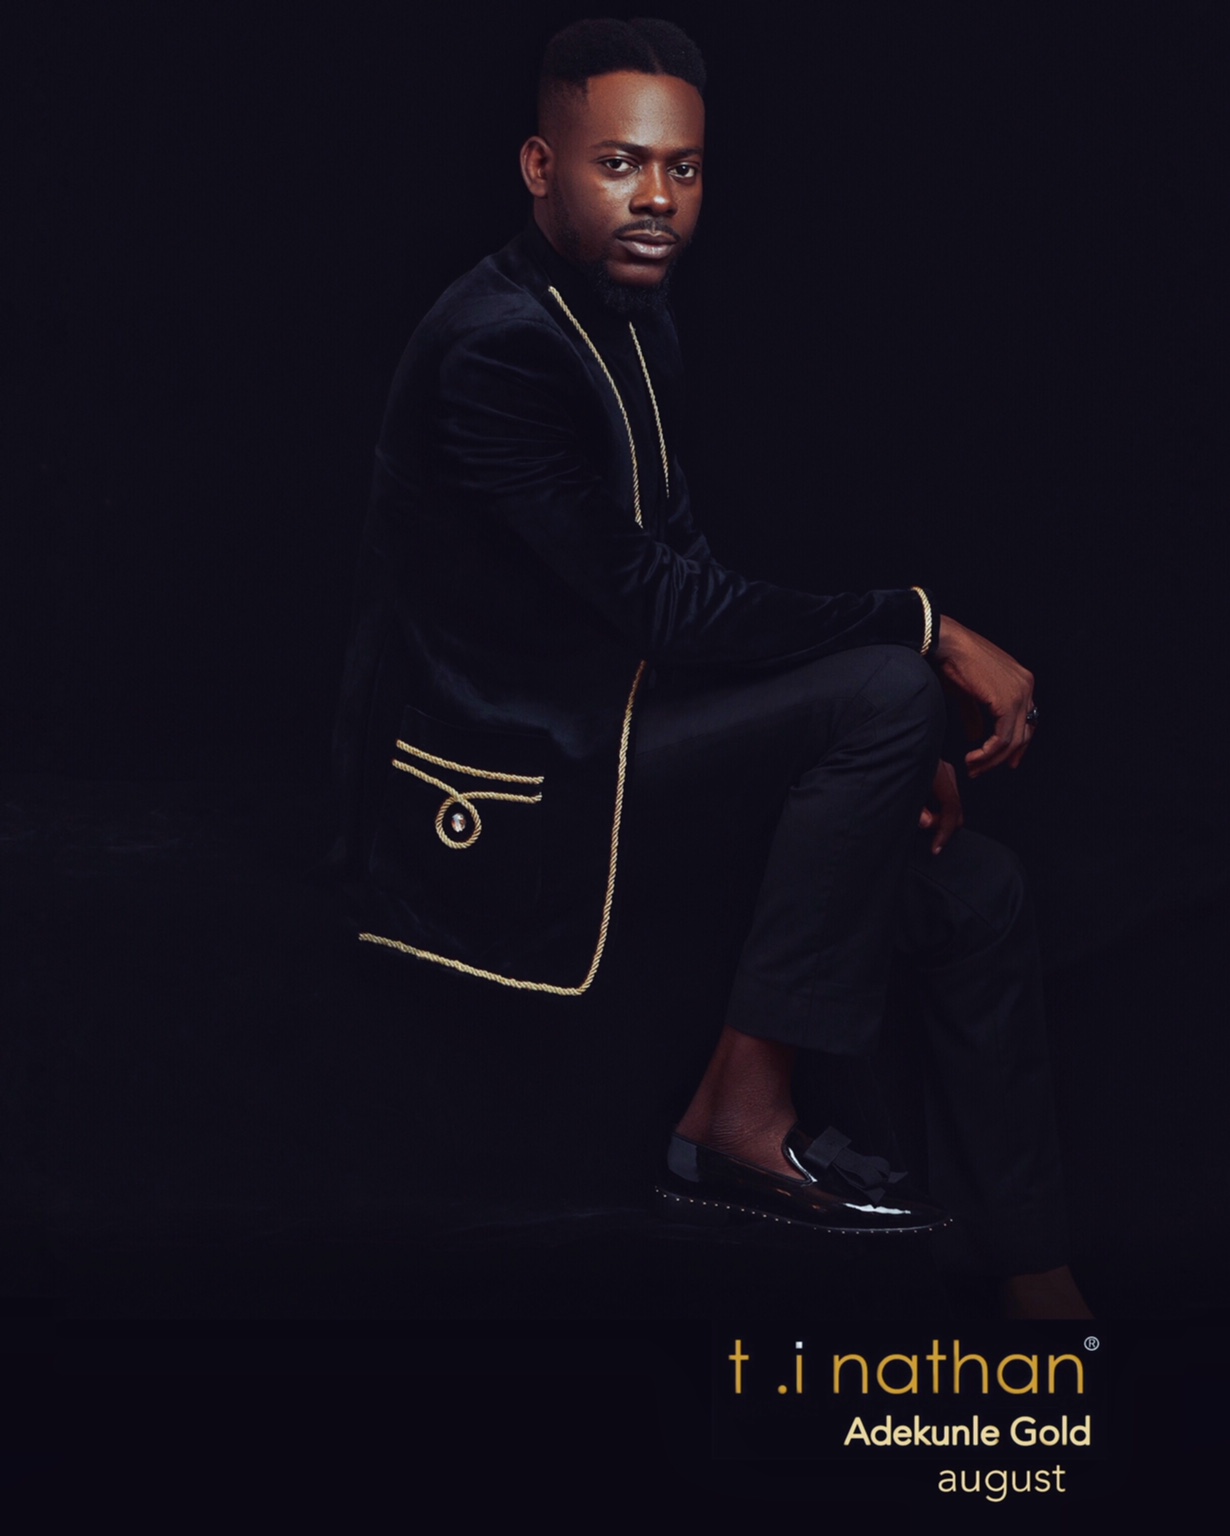 Adekunle Gold Shows Off his Gentlemanly Side for T.I Nathan’s “August” Lookbook